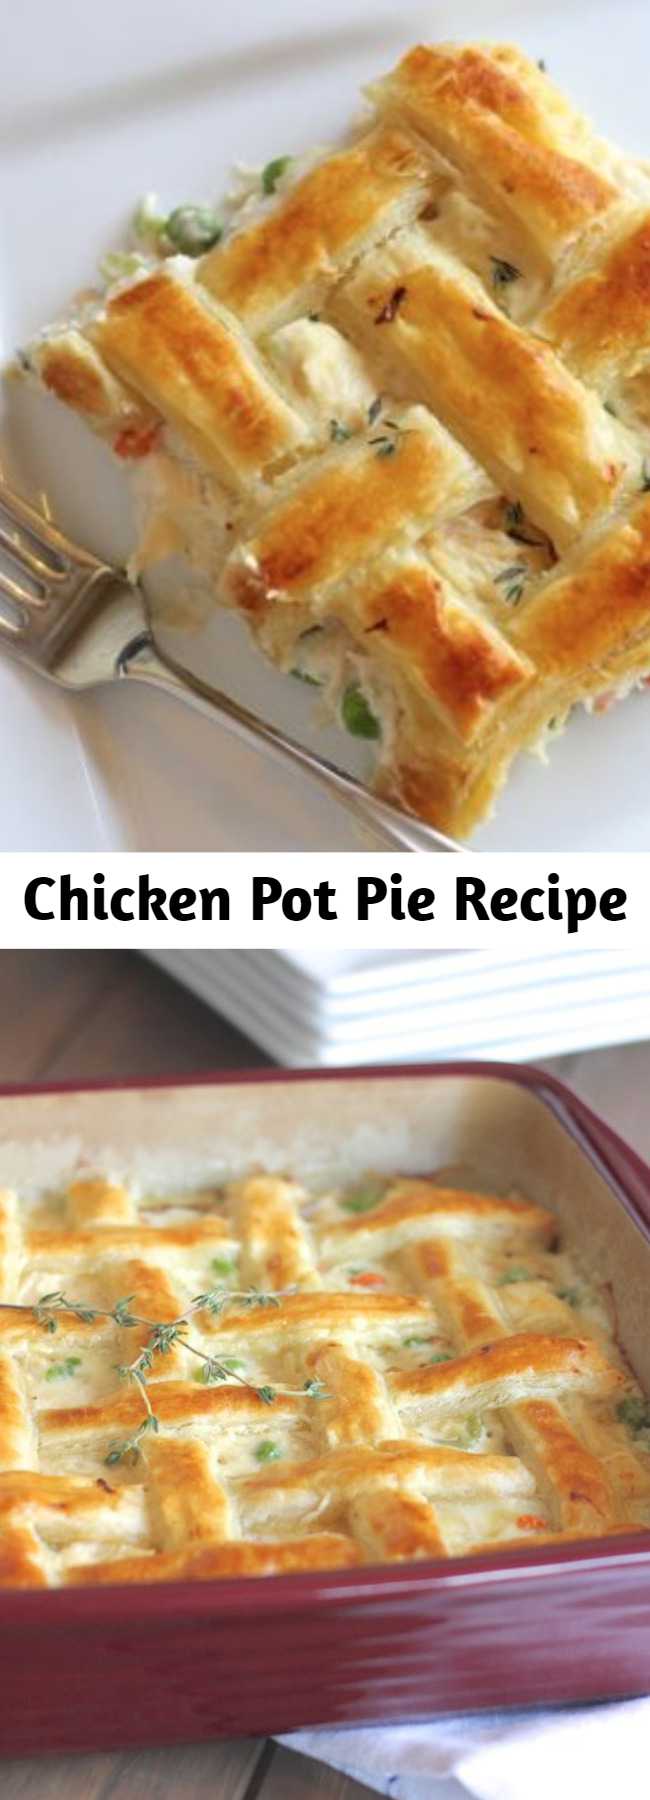 Chicken Pot Pie Recipe - This Chicken Pot Pie has become one of my most popular recipes! It pairs really well with a nice green salad, and that fancy lattice crust makes dinner guests feel extra special. Don’t worry if you’ve never made one before, it’s really not too difficult.